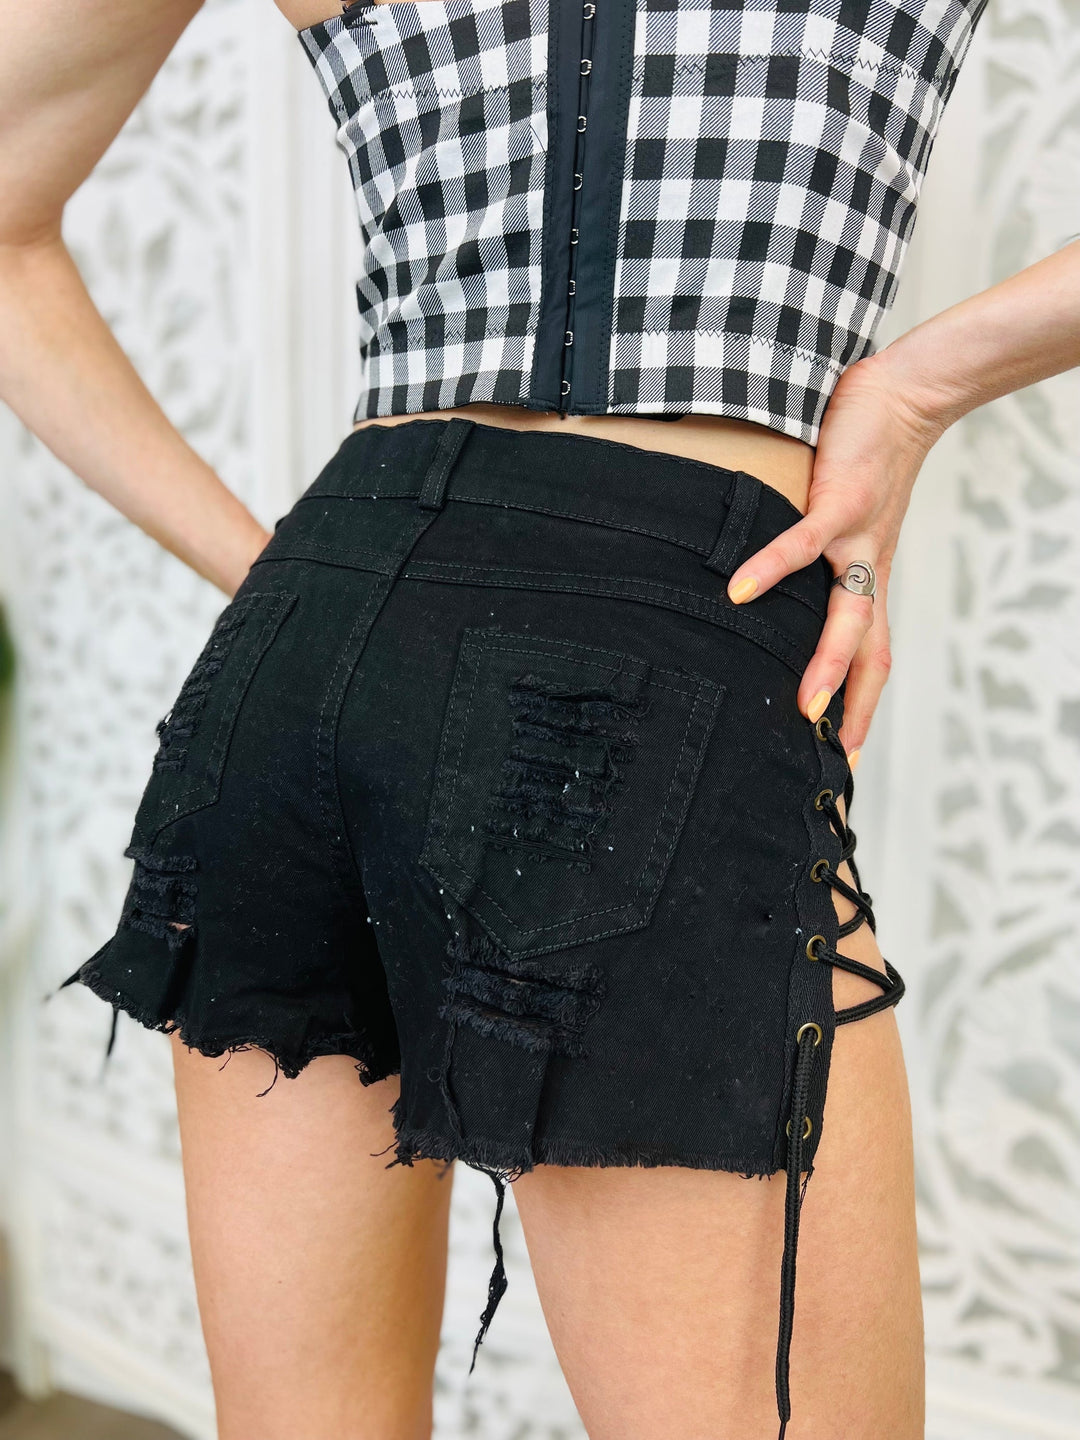 Low Waist Cut Off Denim Booty Shorts, New by BeWicked